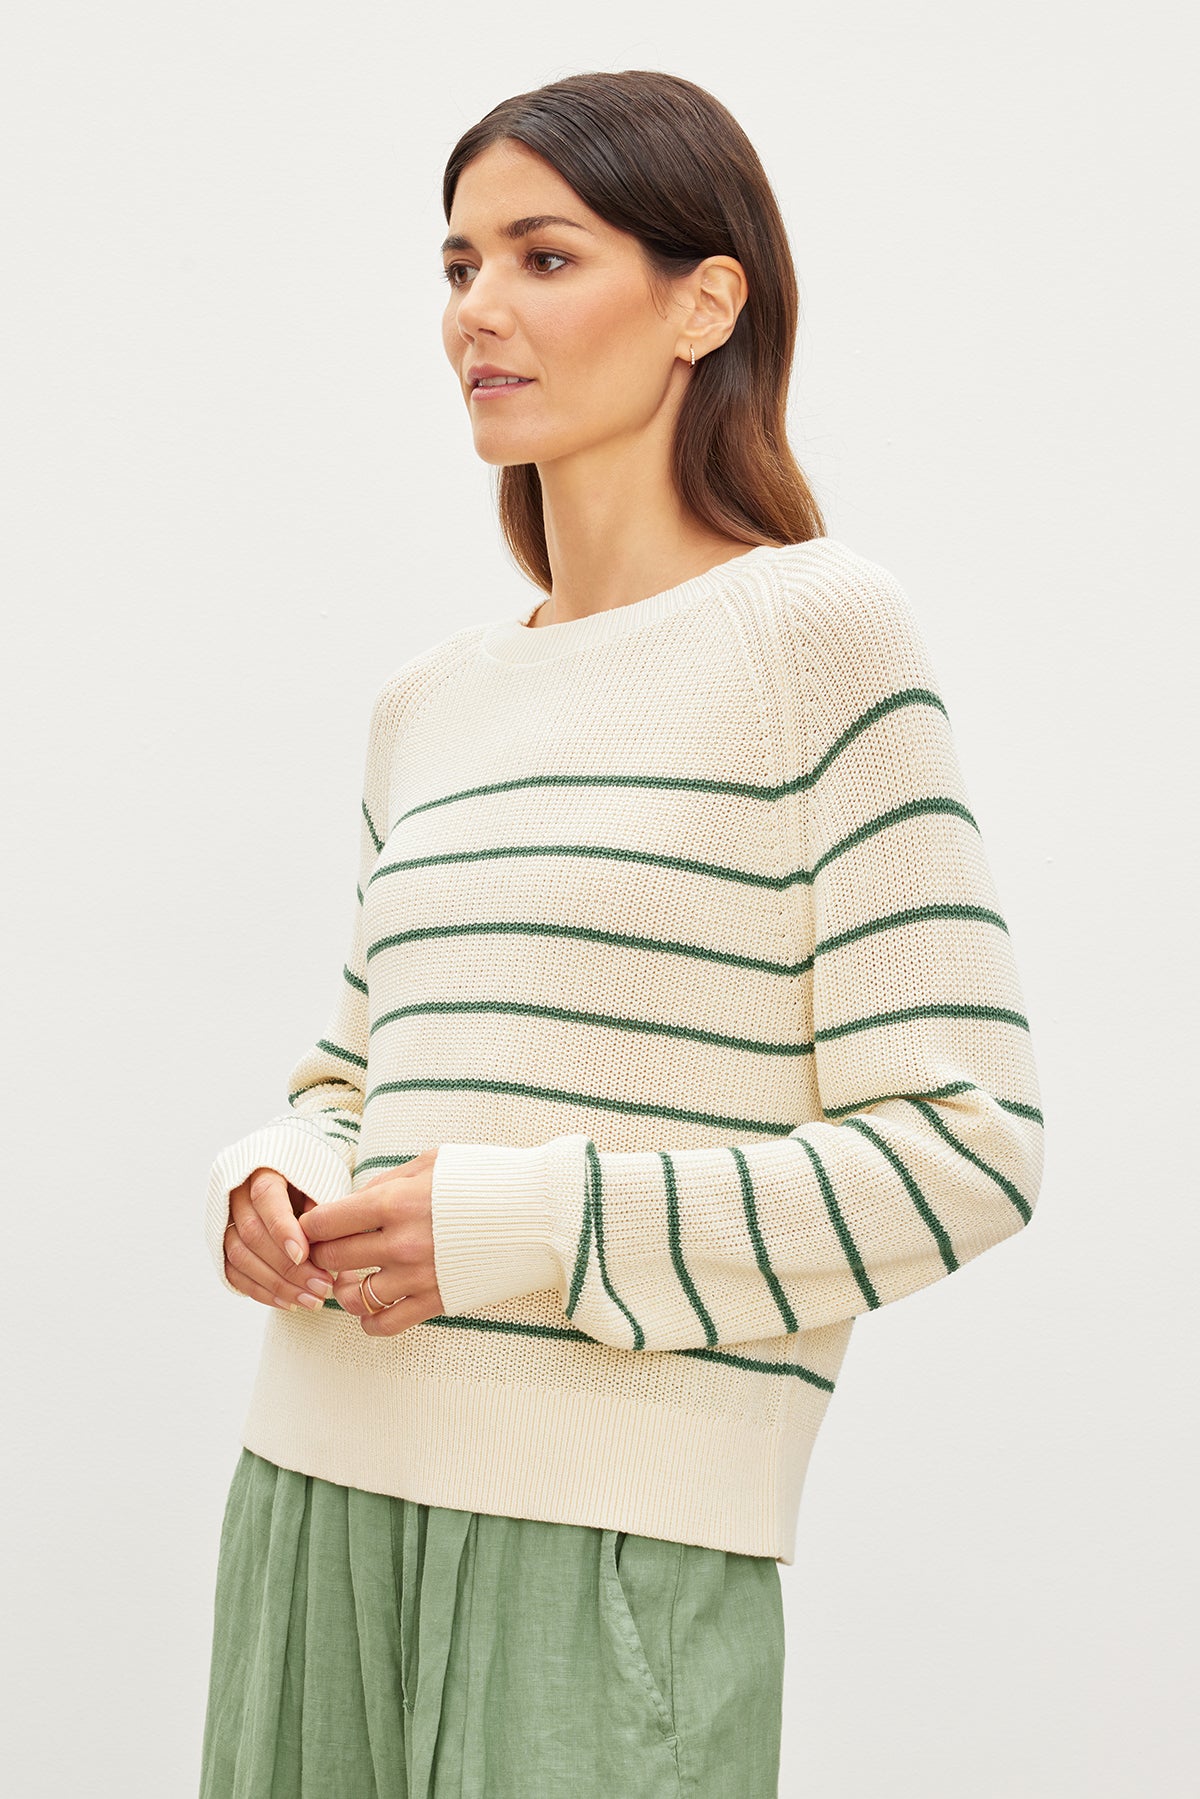 The model is wearing a Velvet by Graham & Spencer CHAYSE STRIPED CREW NECK SWEATER.-35955537084609